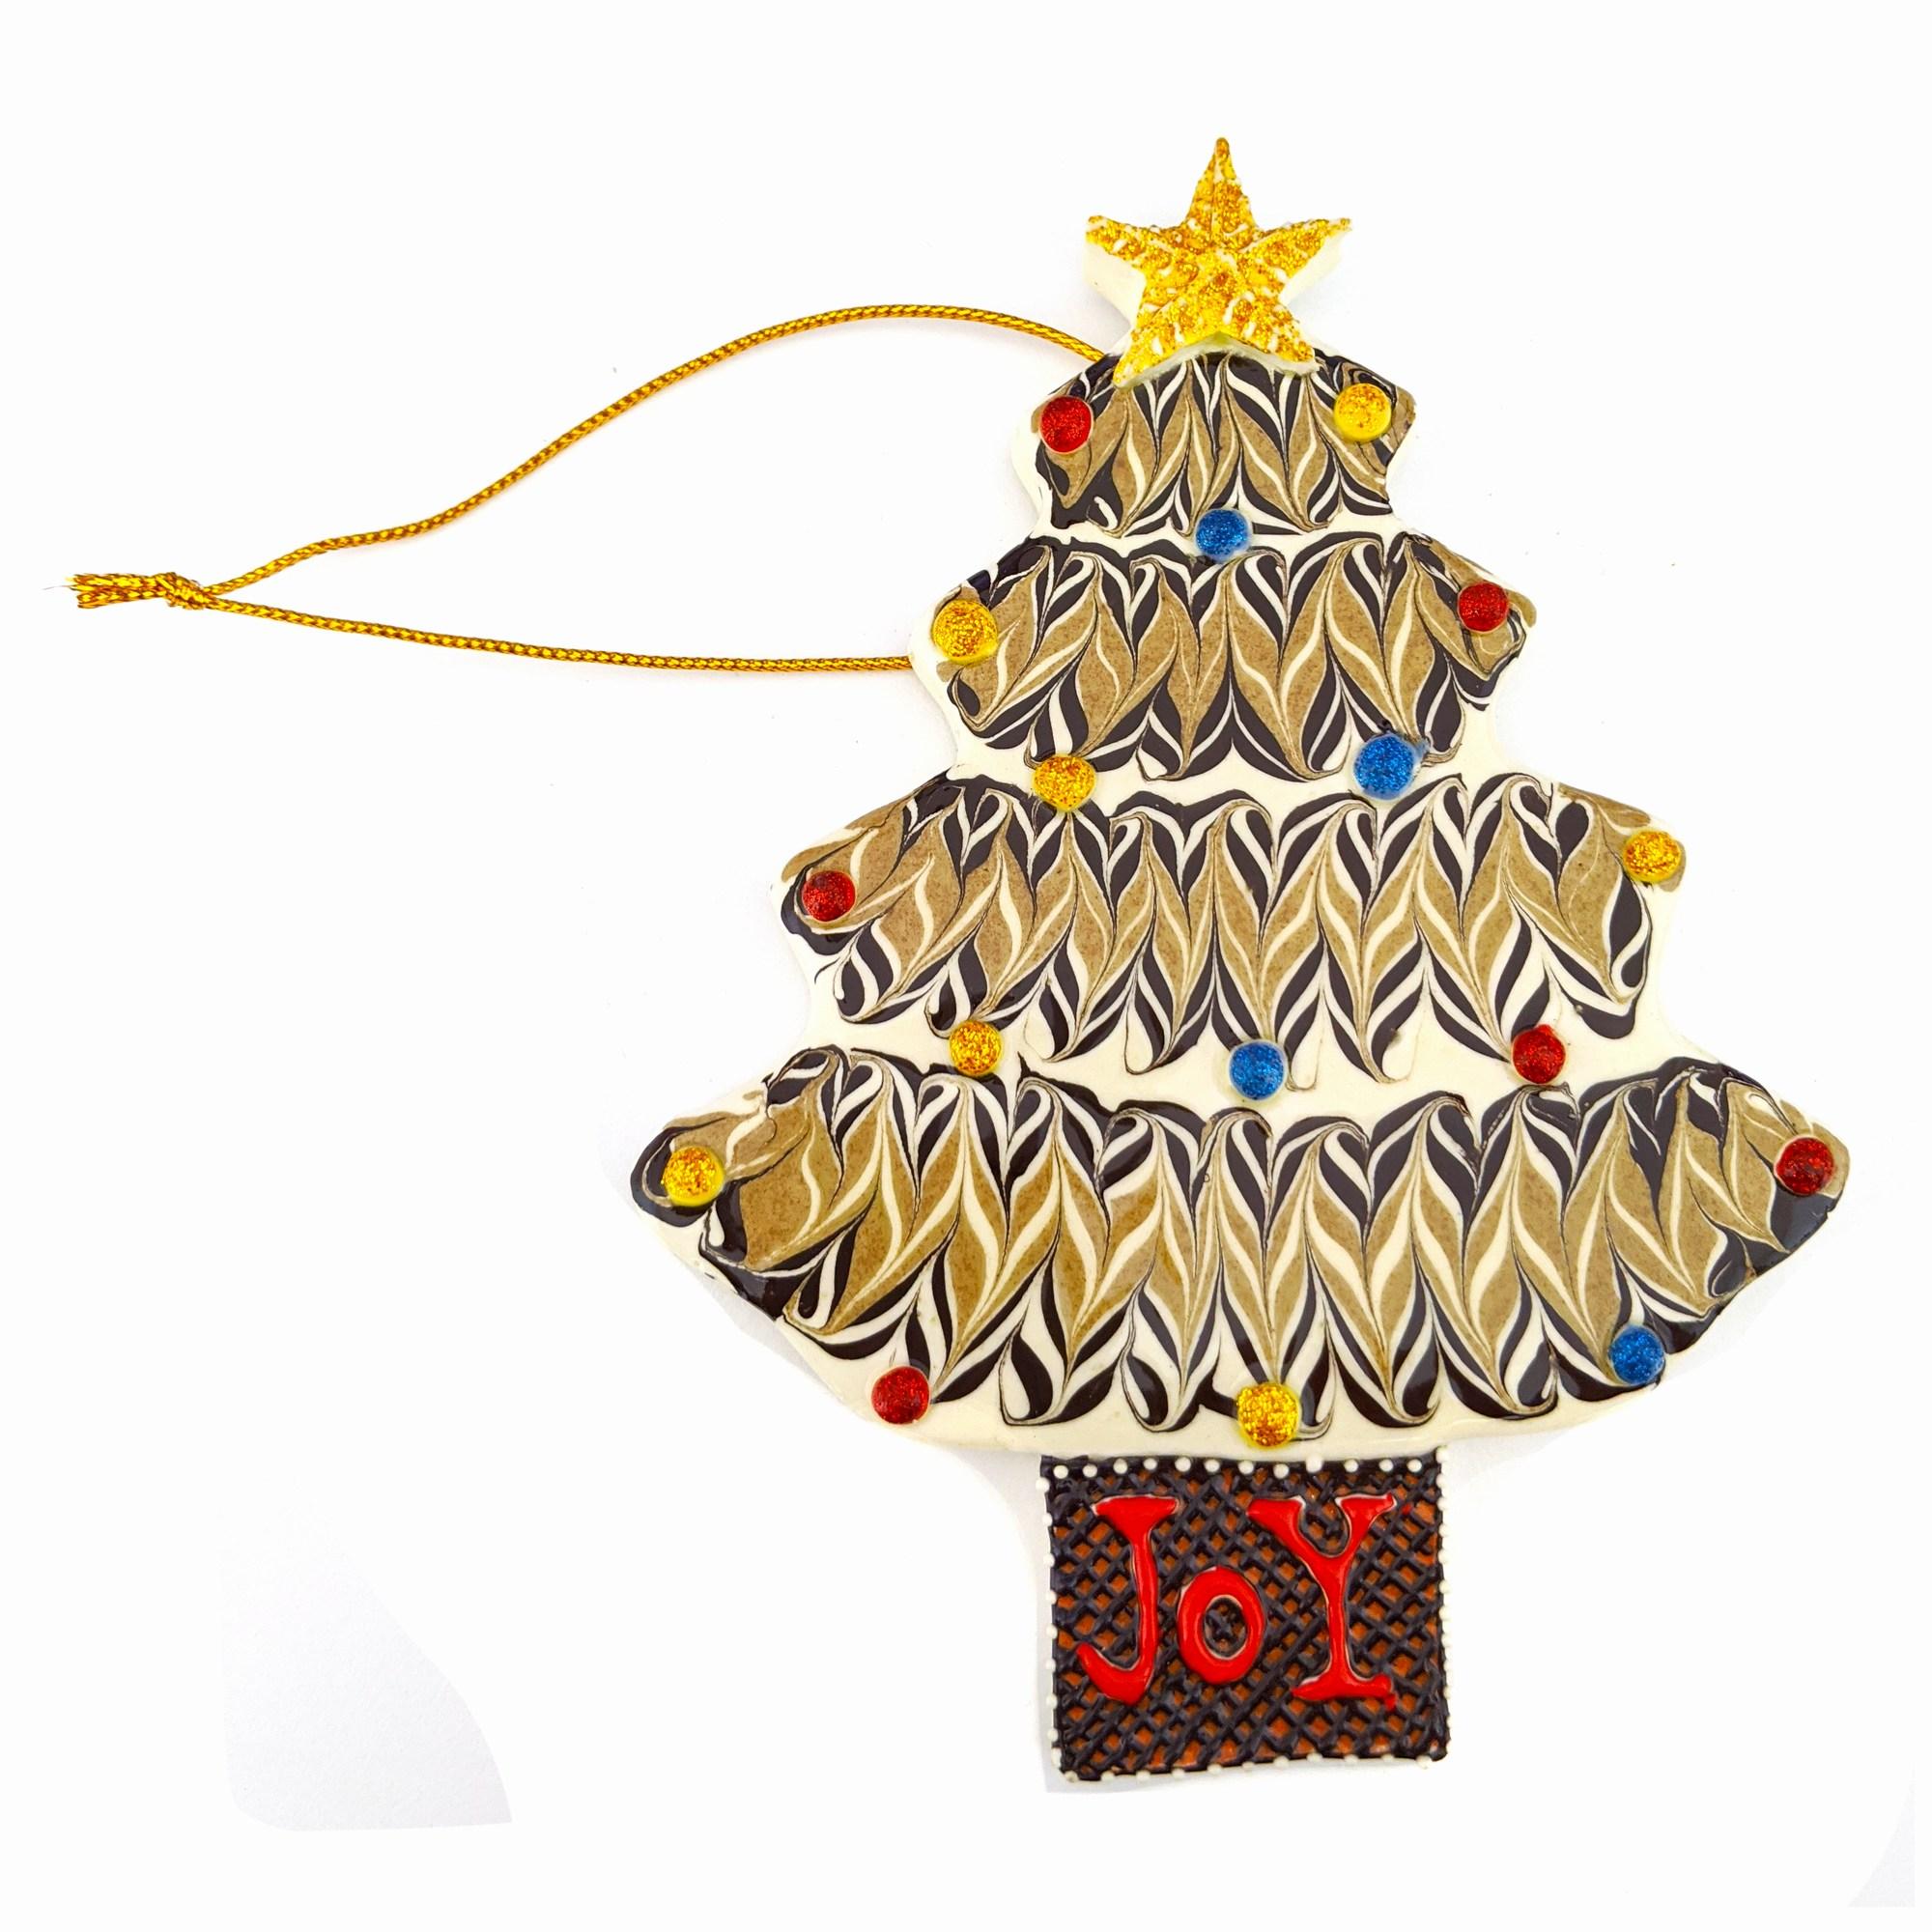 Irma Starr Figurative Sculpture - Christmas Tree Ornament "JOY" (from the Christmas Series)